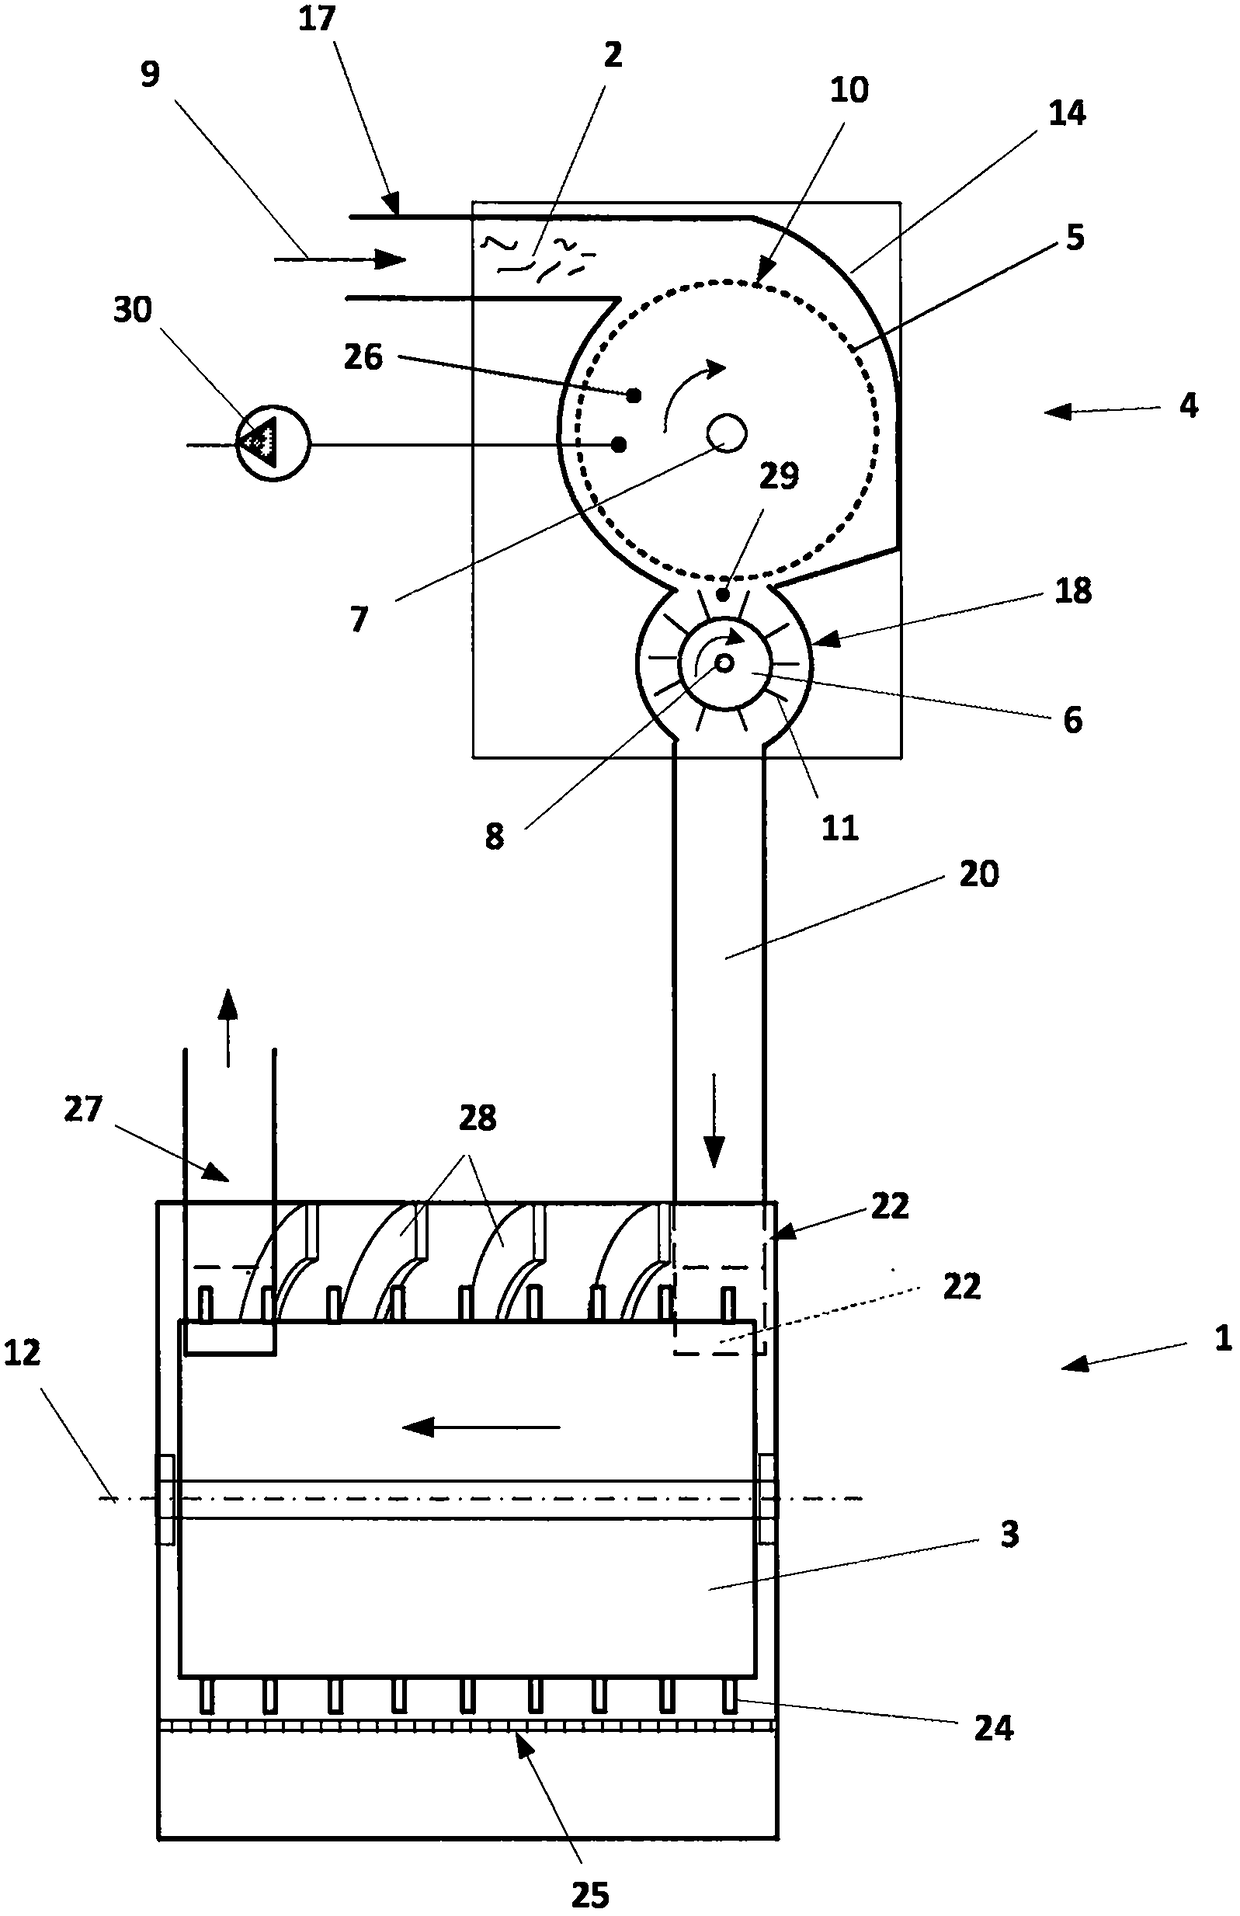 Device for cleaning fibrous material